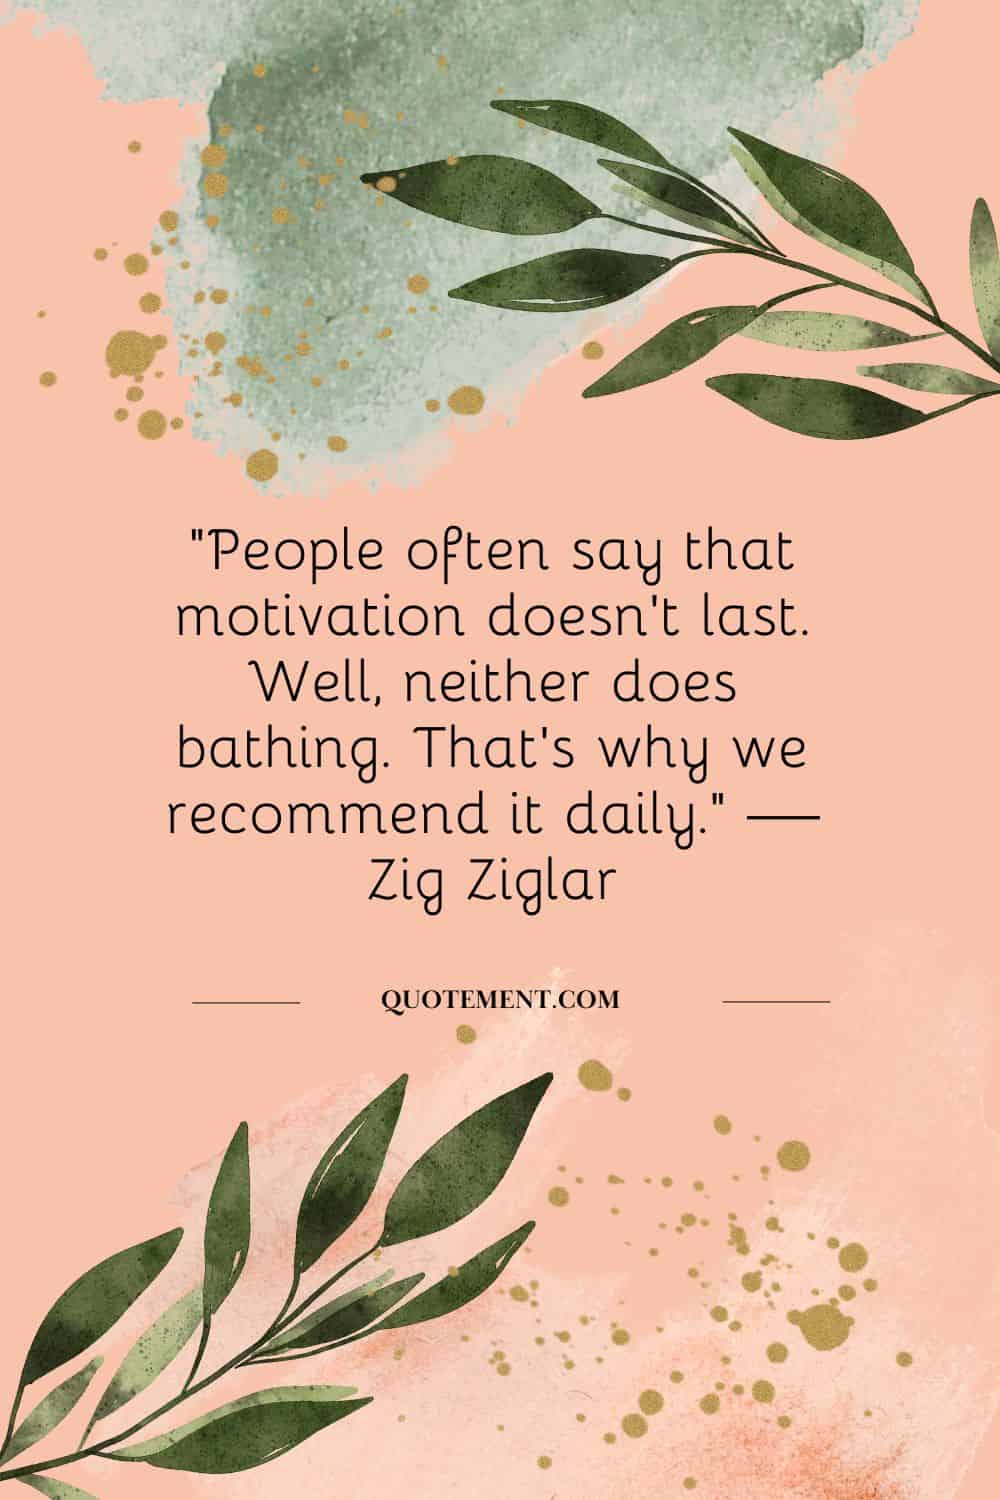 “People often say that motivation doesn’t last. Well, neither does bathing. That’s why we recommend it daily.” — Zig Ziglar